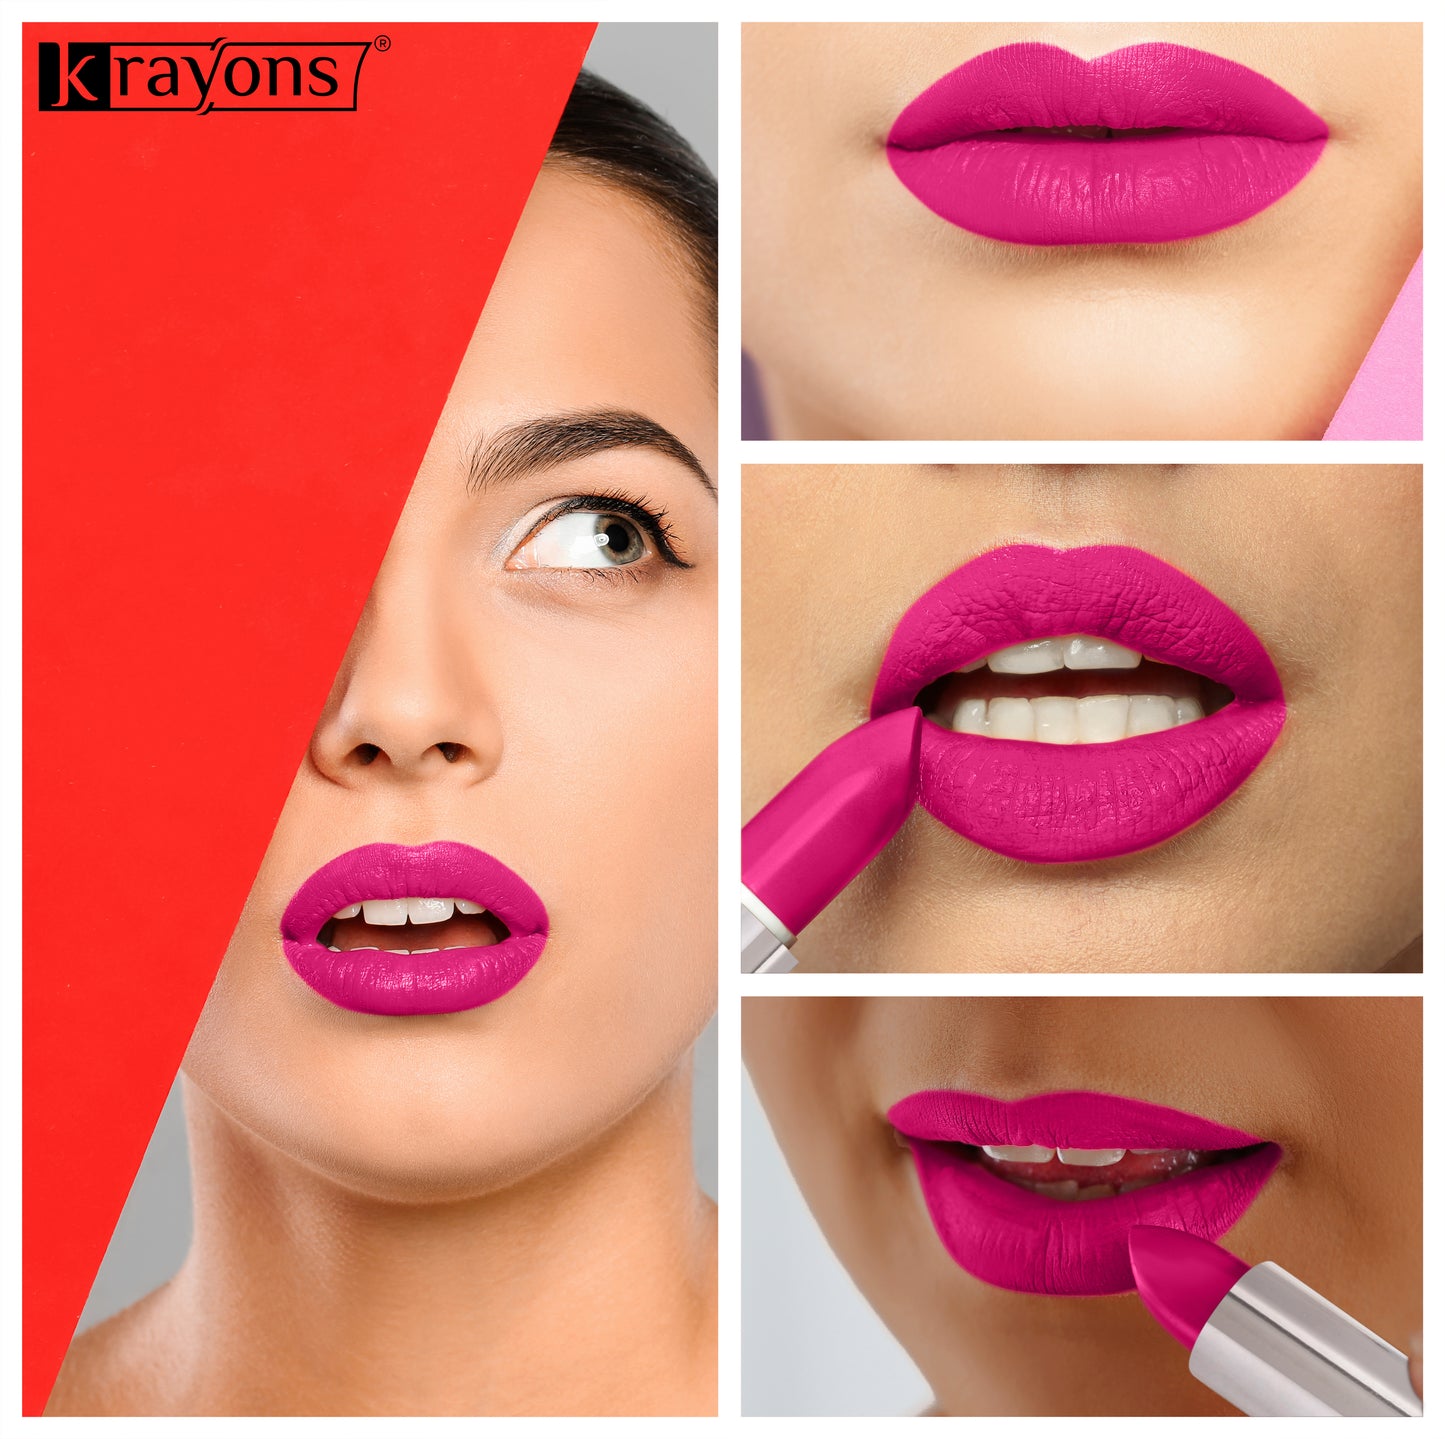 Krayons White Secret Moisturizing Matte lipstick, Waterproof, Long lasting, Pink Rouge, Indian Red, 4gm Each, Combo (Pack of 2)